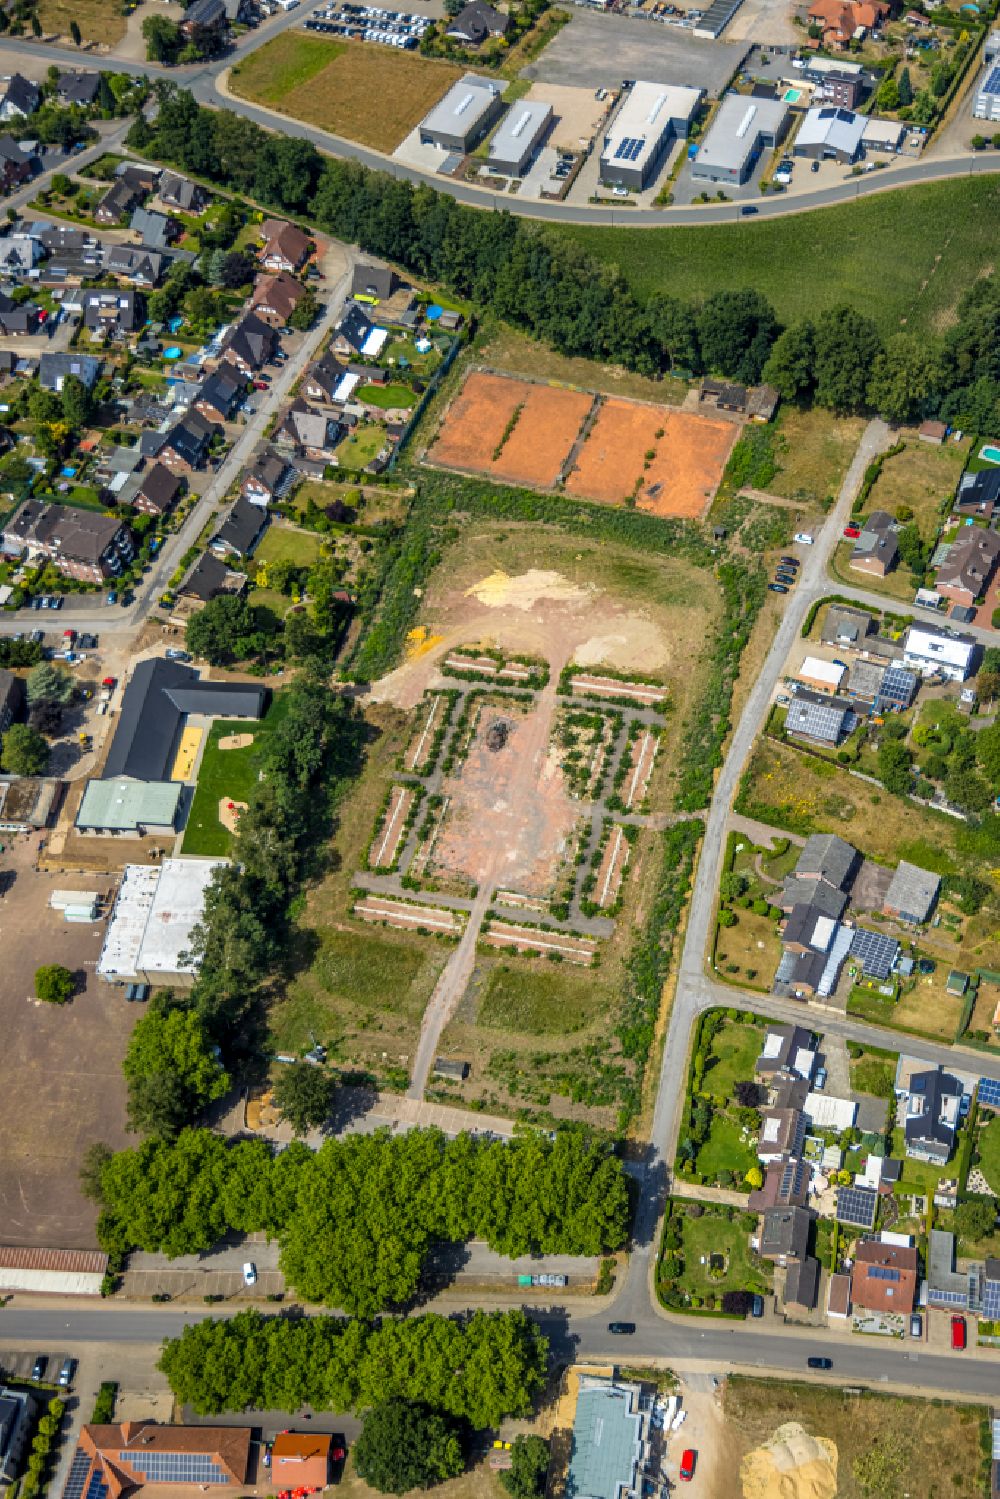 Aerial photograph Hamminkeln - Container settlement as temporary shelter and reception center for refugees in the district Dingden in Hamminkeln in the state North Rhine-Westphalia, Germany